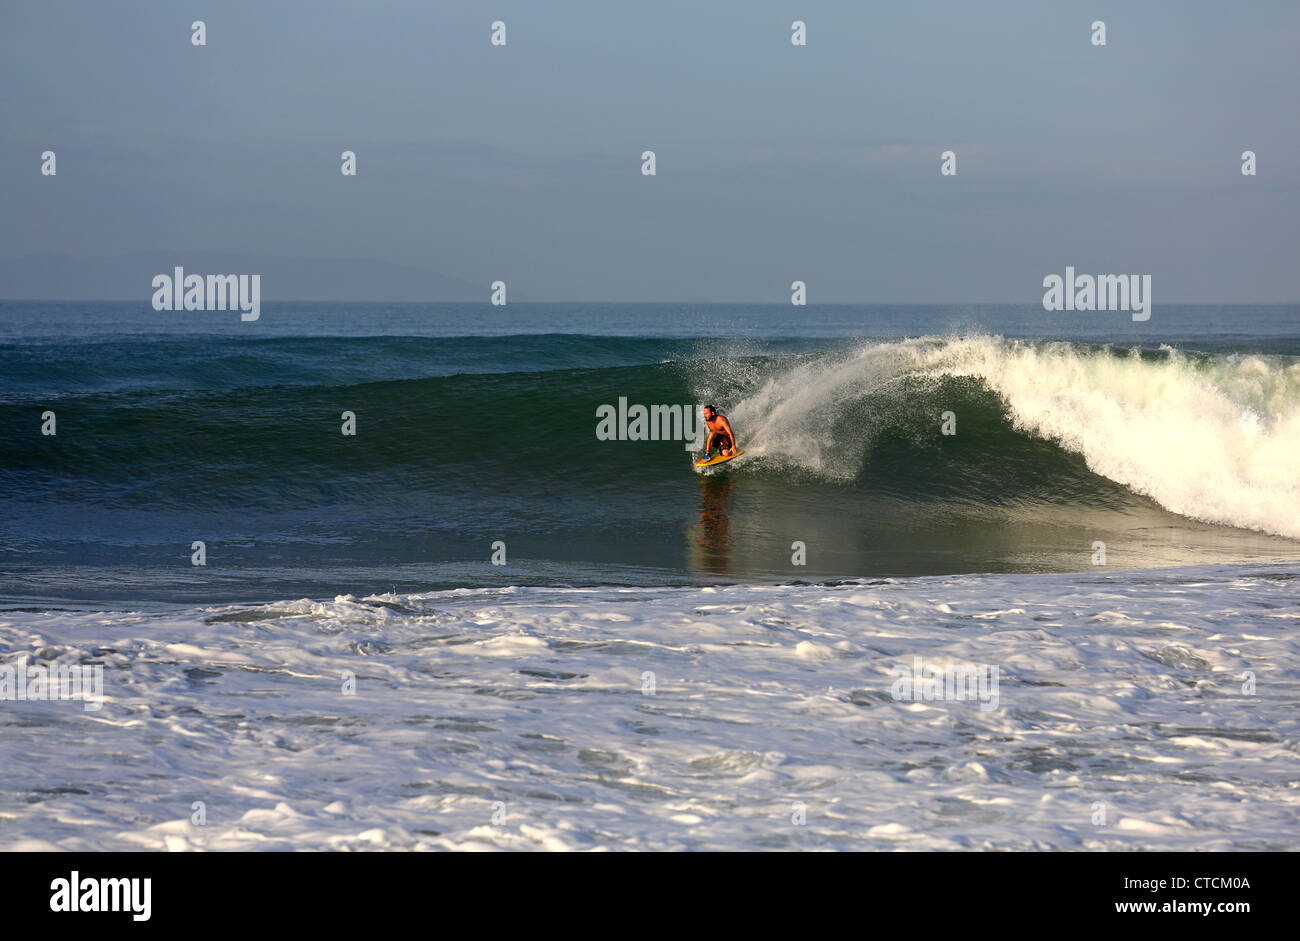 Man body surfing a large wave in West Java, Indonesia. Stock Photo